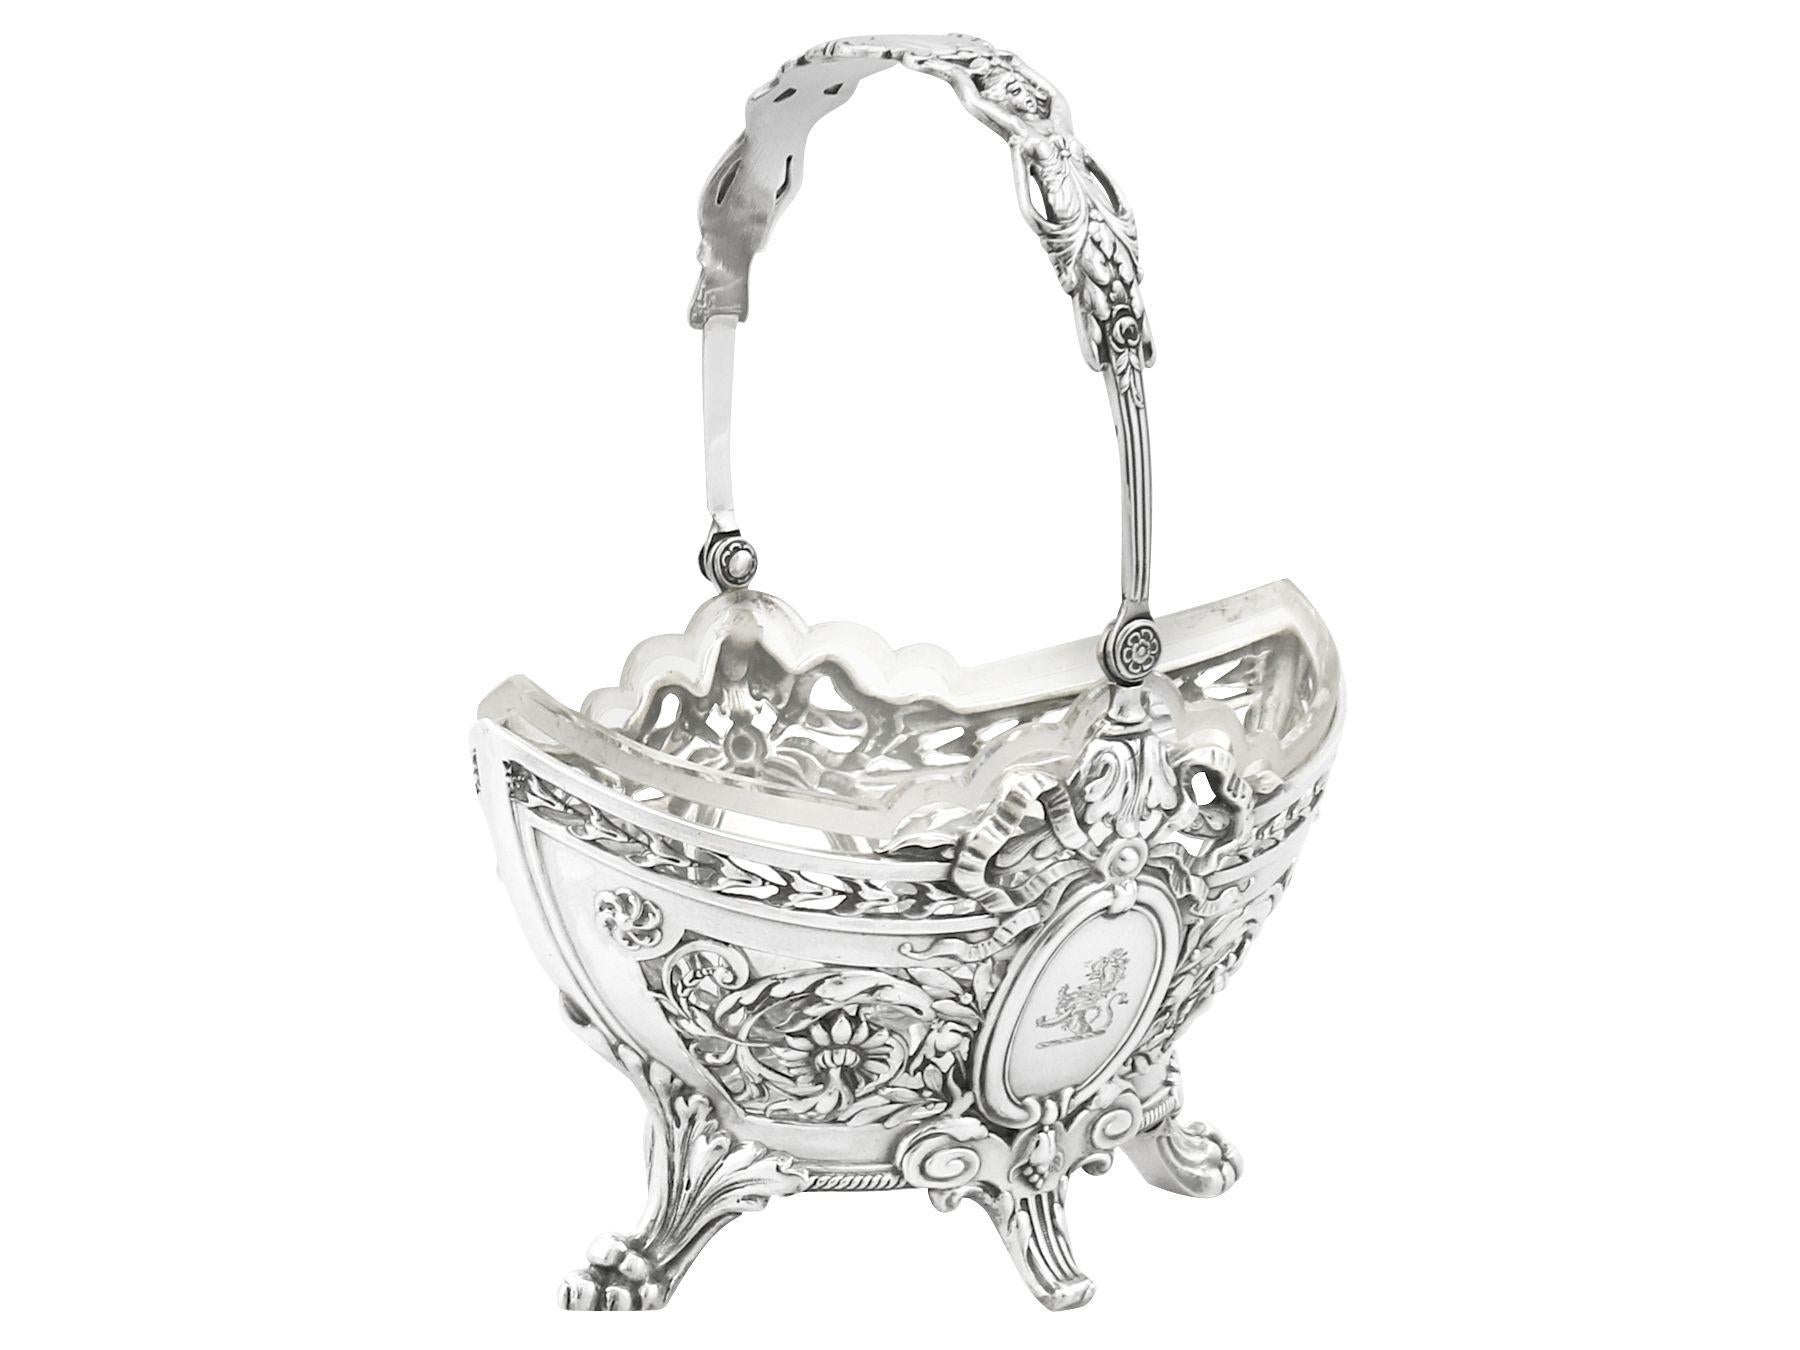 Victorian Sterling Silver Bon Bon Basket In Excellent Condition For Sale In Jesmond, Newcastle Upon Tyne